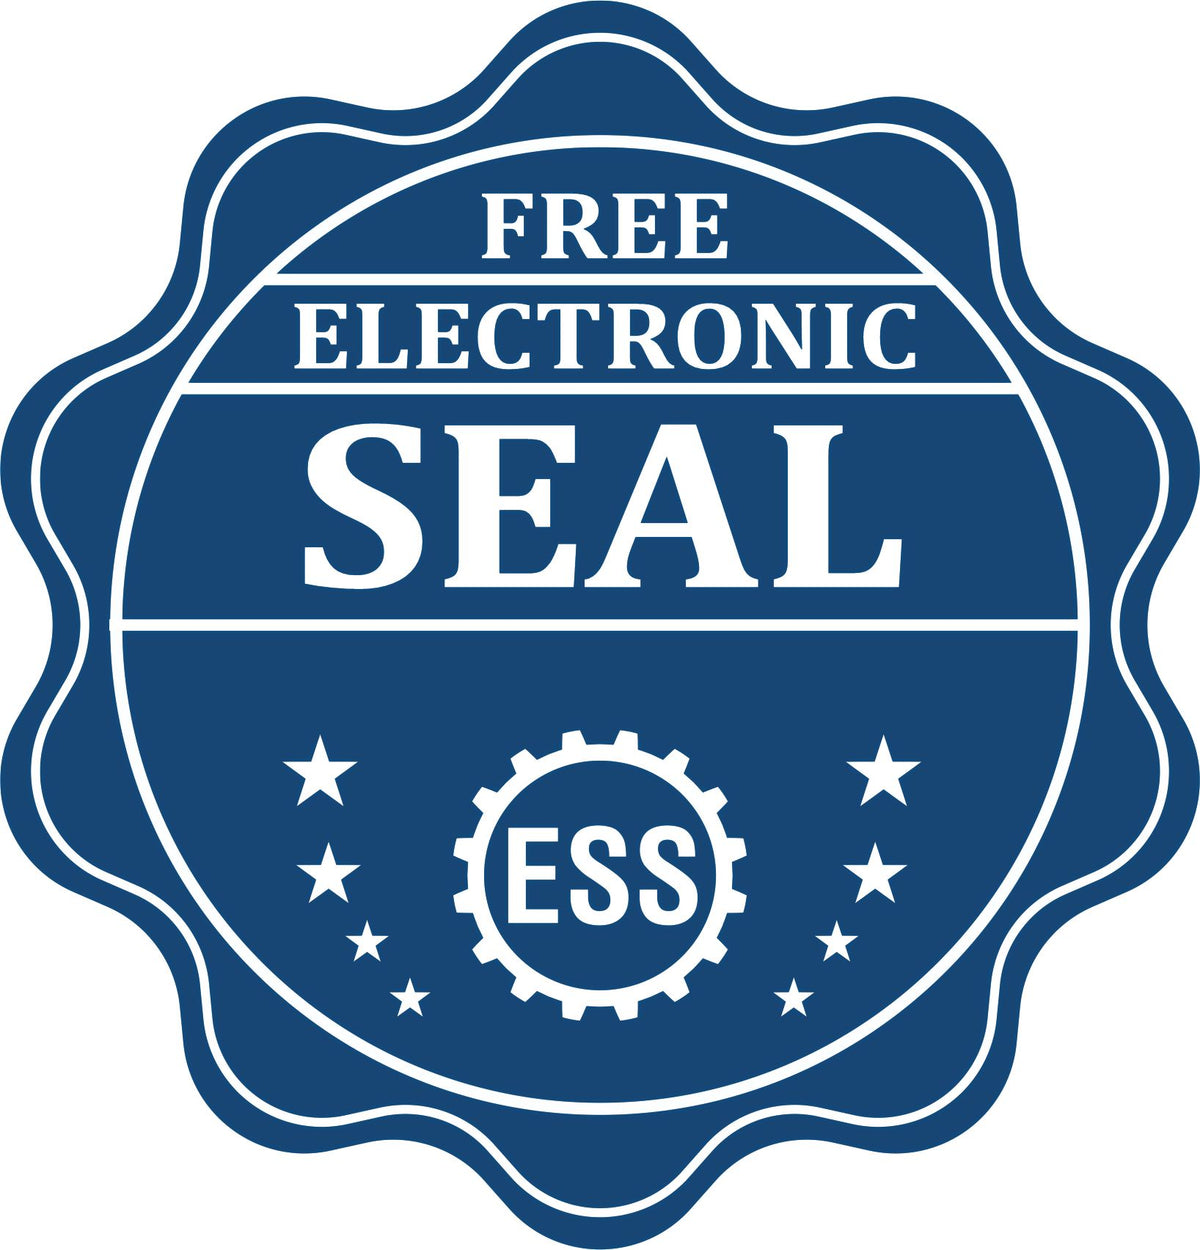 A badge showing a free electronic seal for the Premium MaxLight Pre-Inked Wisconsin Geology Stamp with stars and the ESS gear on the emblem.